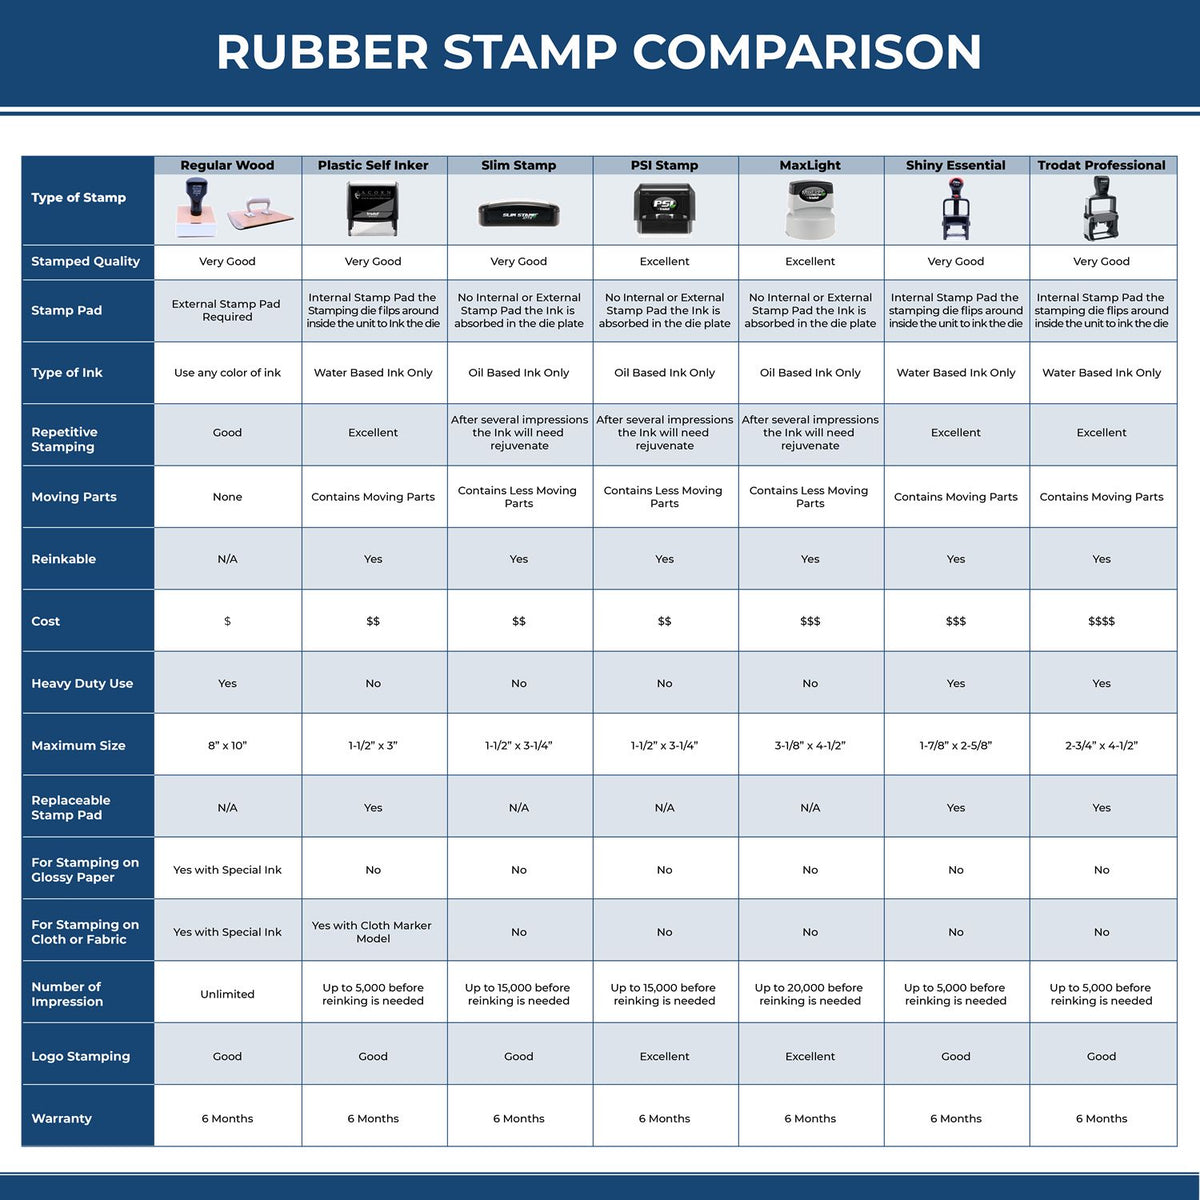 Please Sign and Return with Pen Rubber Stamp 4785R Rubber Stamp Comparison